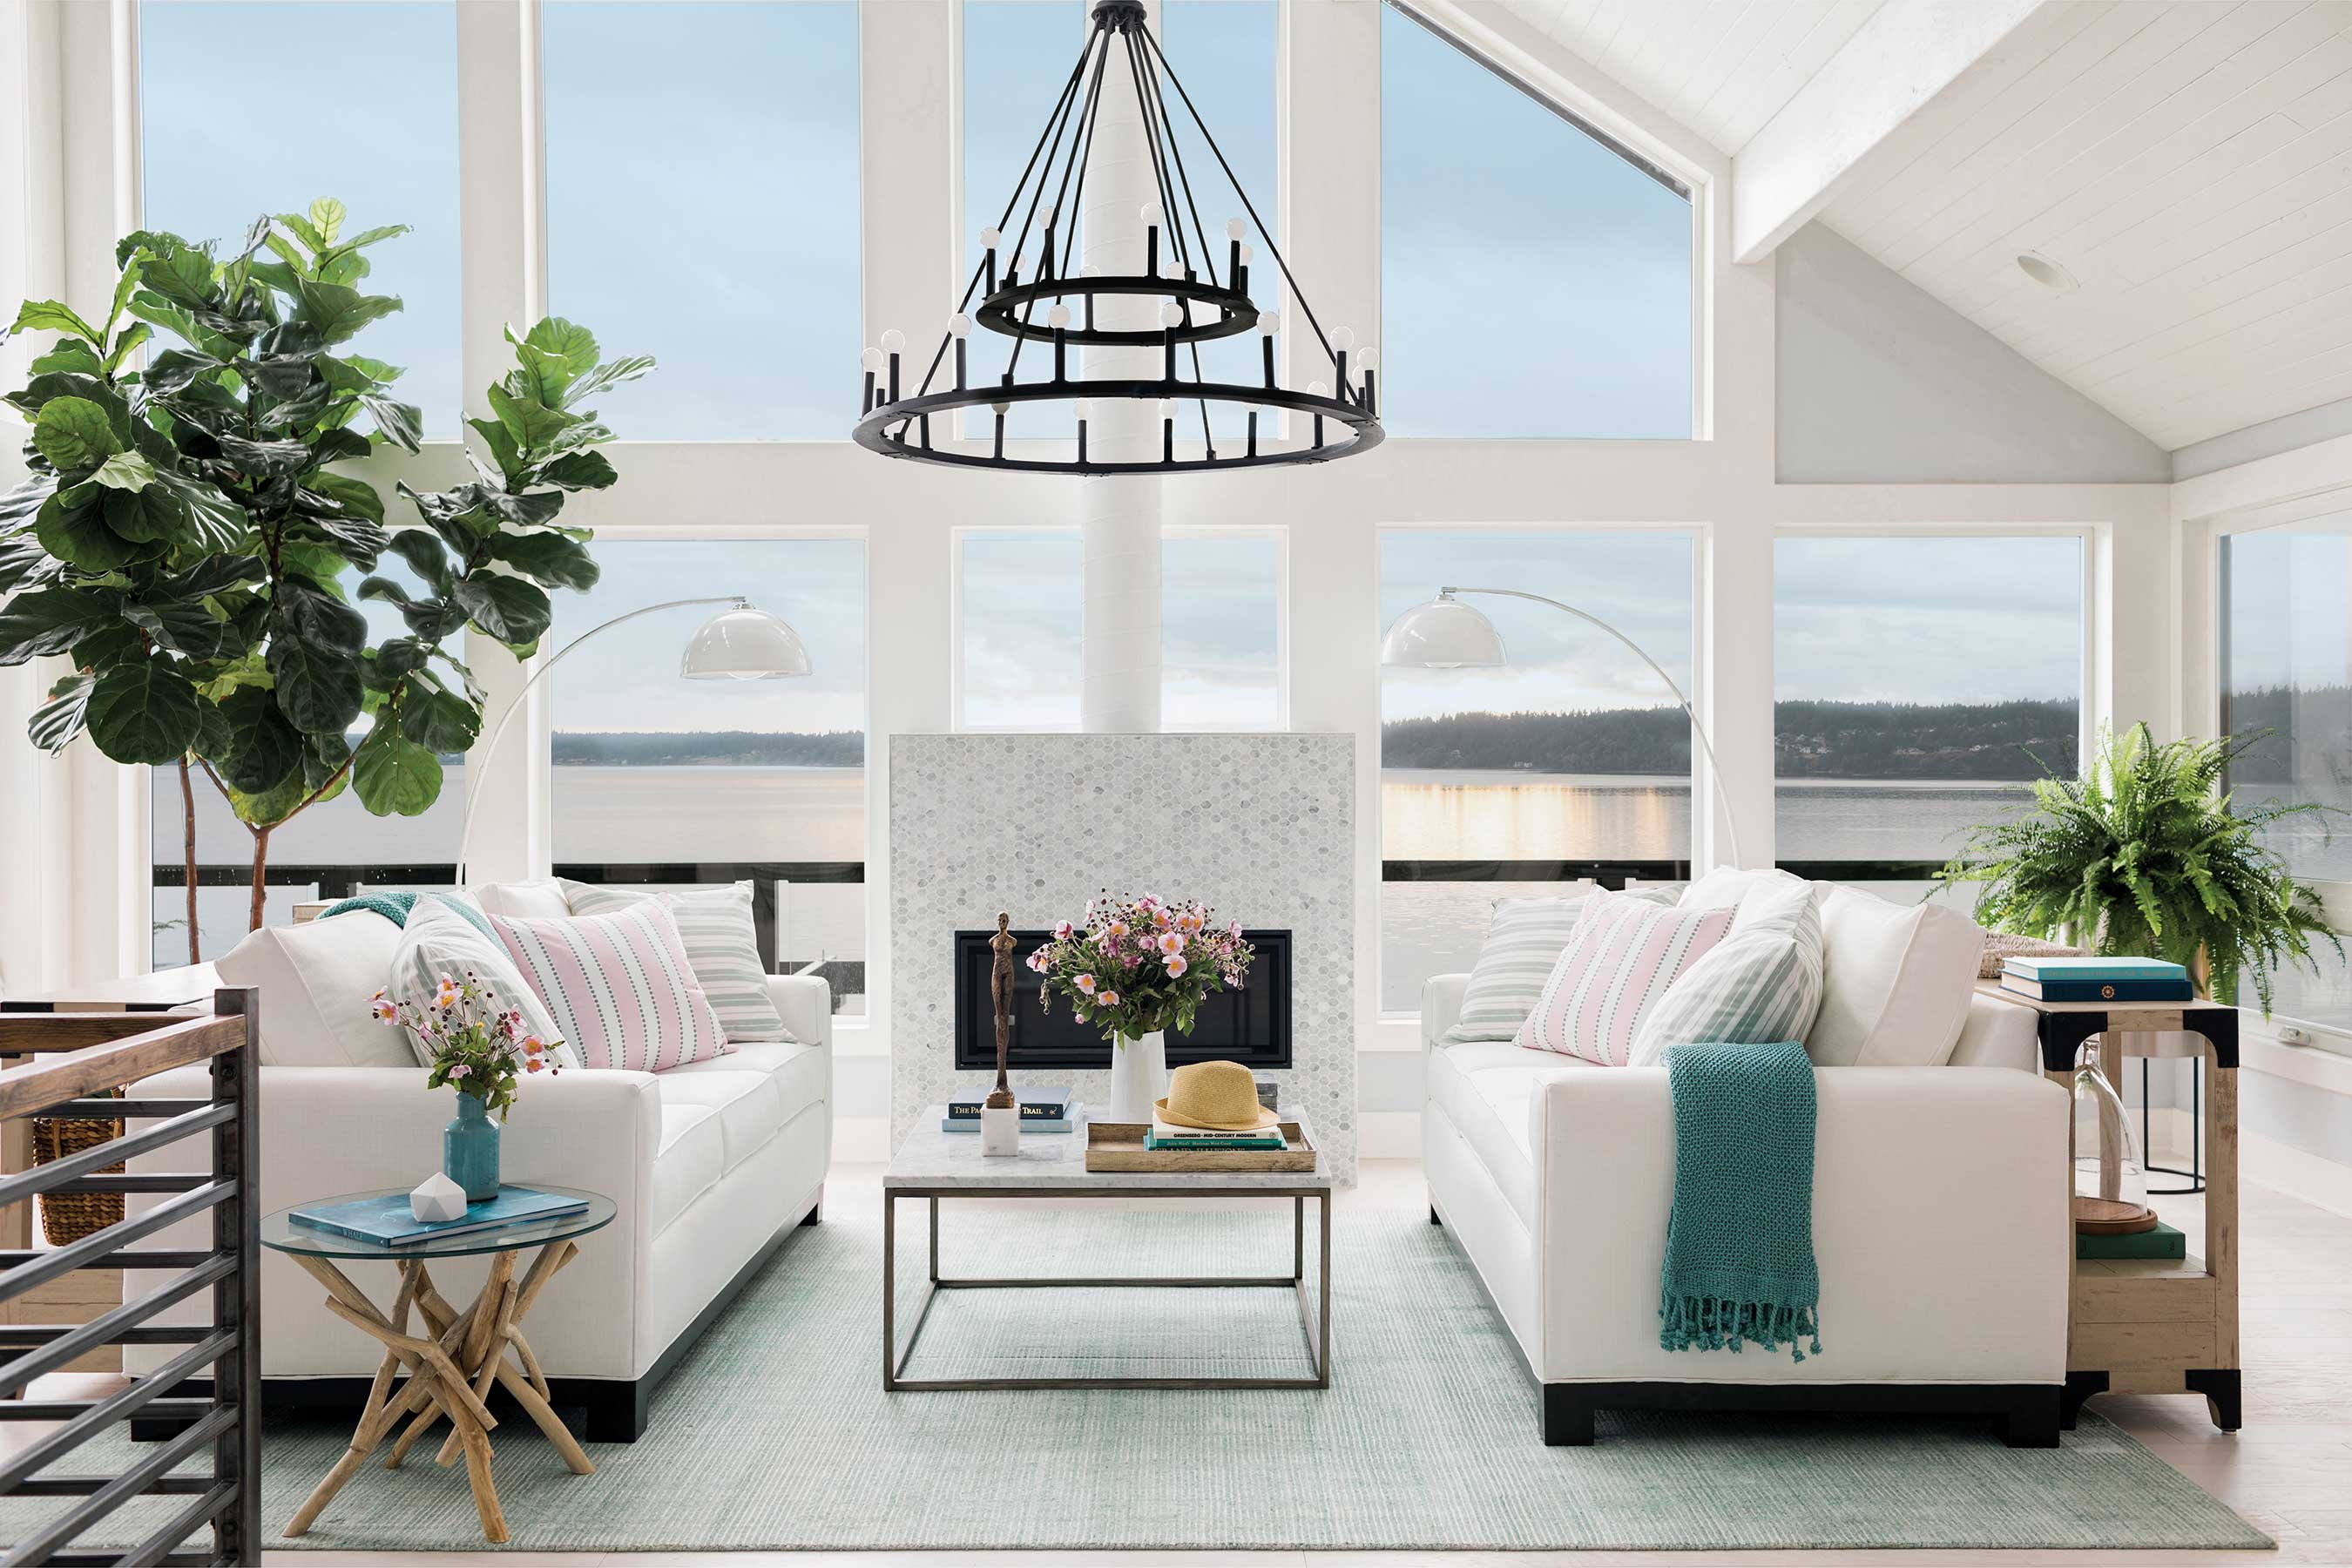 The great room in HGTV Dream Home 2018 makes good use of the incredible scenery, with floor-to-ceiling windows that provide unobstructed views of Puget Sound. Bright white furniture, an industrial iron chandelier, live plants and touches of green and pink reinforce the home’s coastal and traditional style.